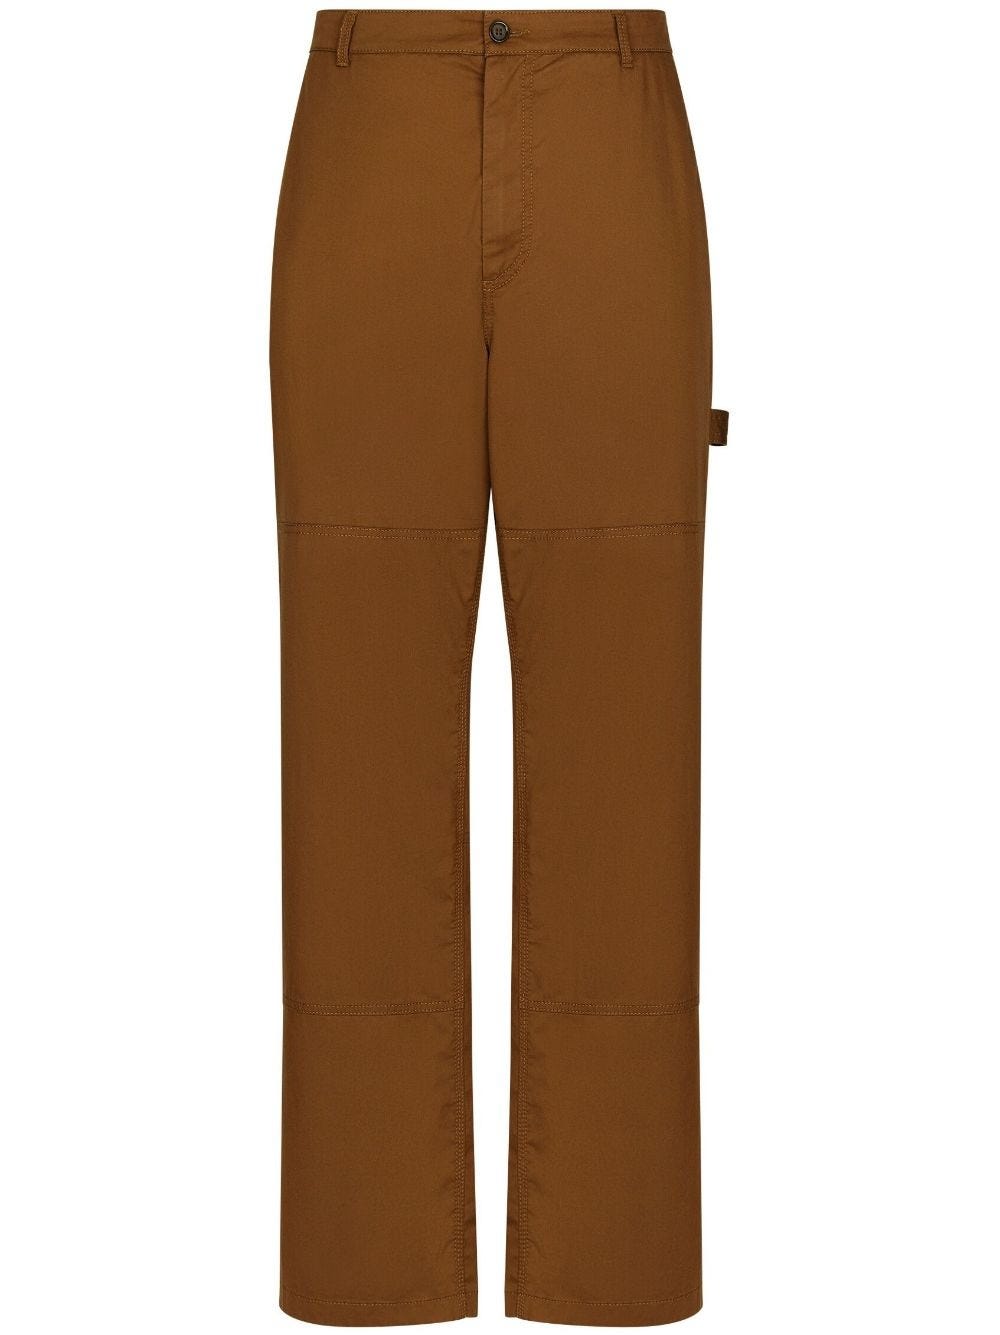 DOLCE & GABBANA STRAIGHT BROWN TROUSERS WITH APPLIQUÉ